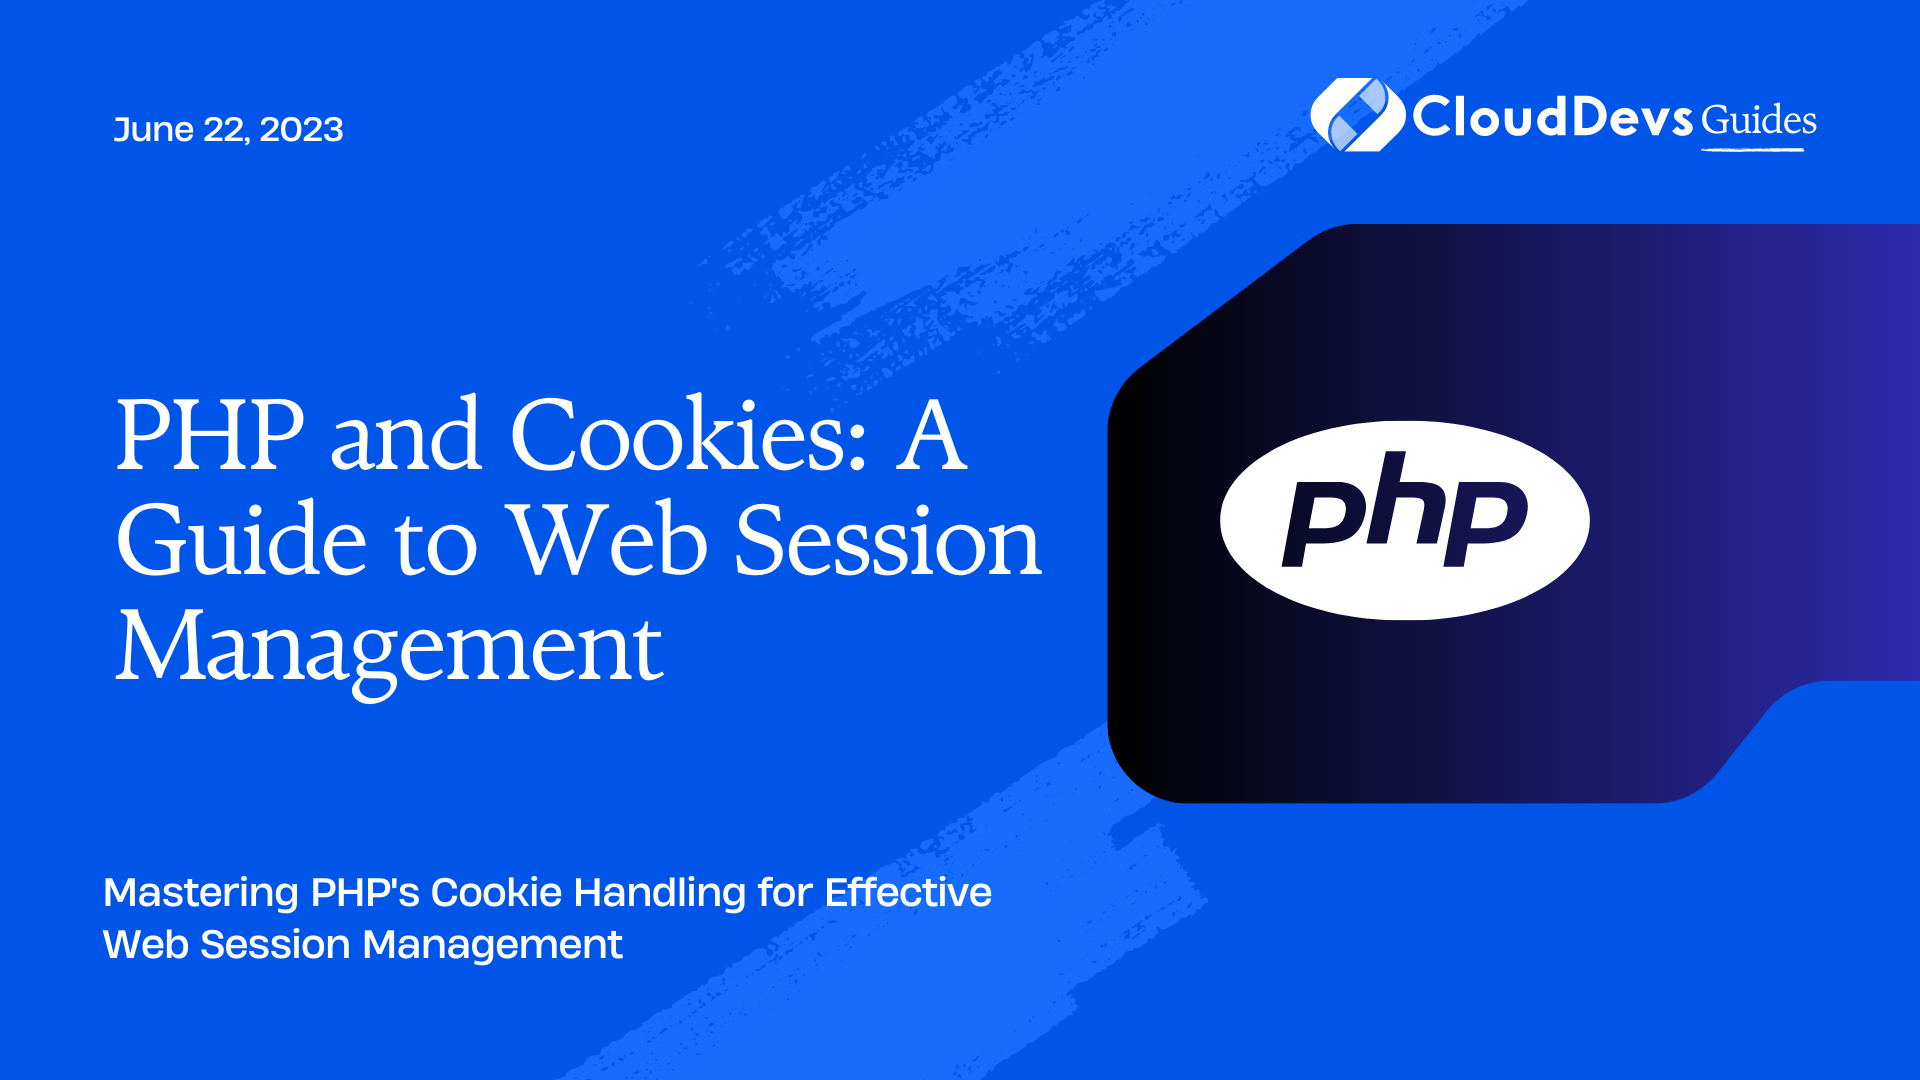 PHP and Cookies: A Guide to Web Session Management